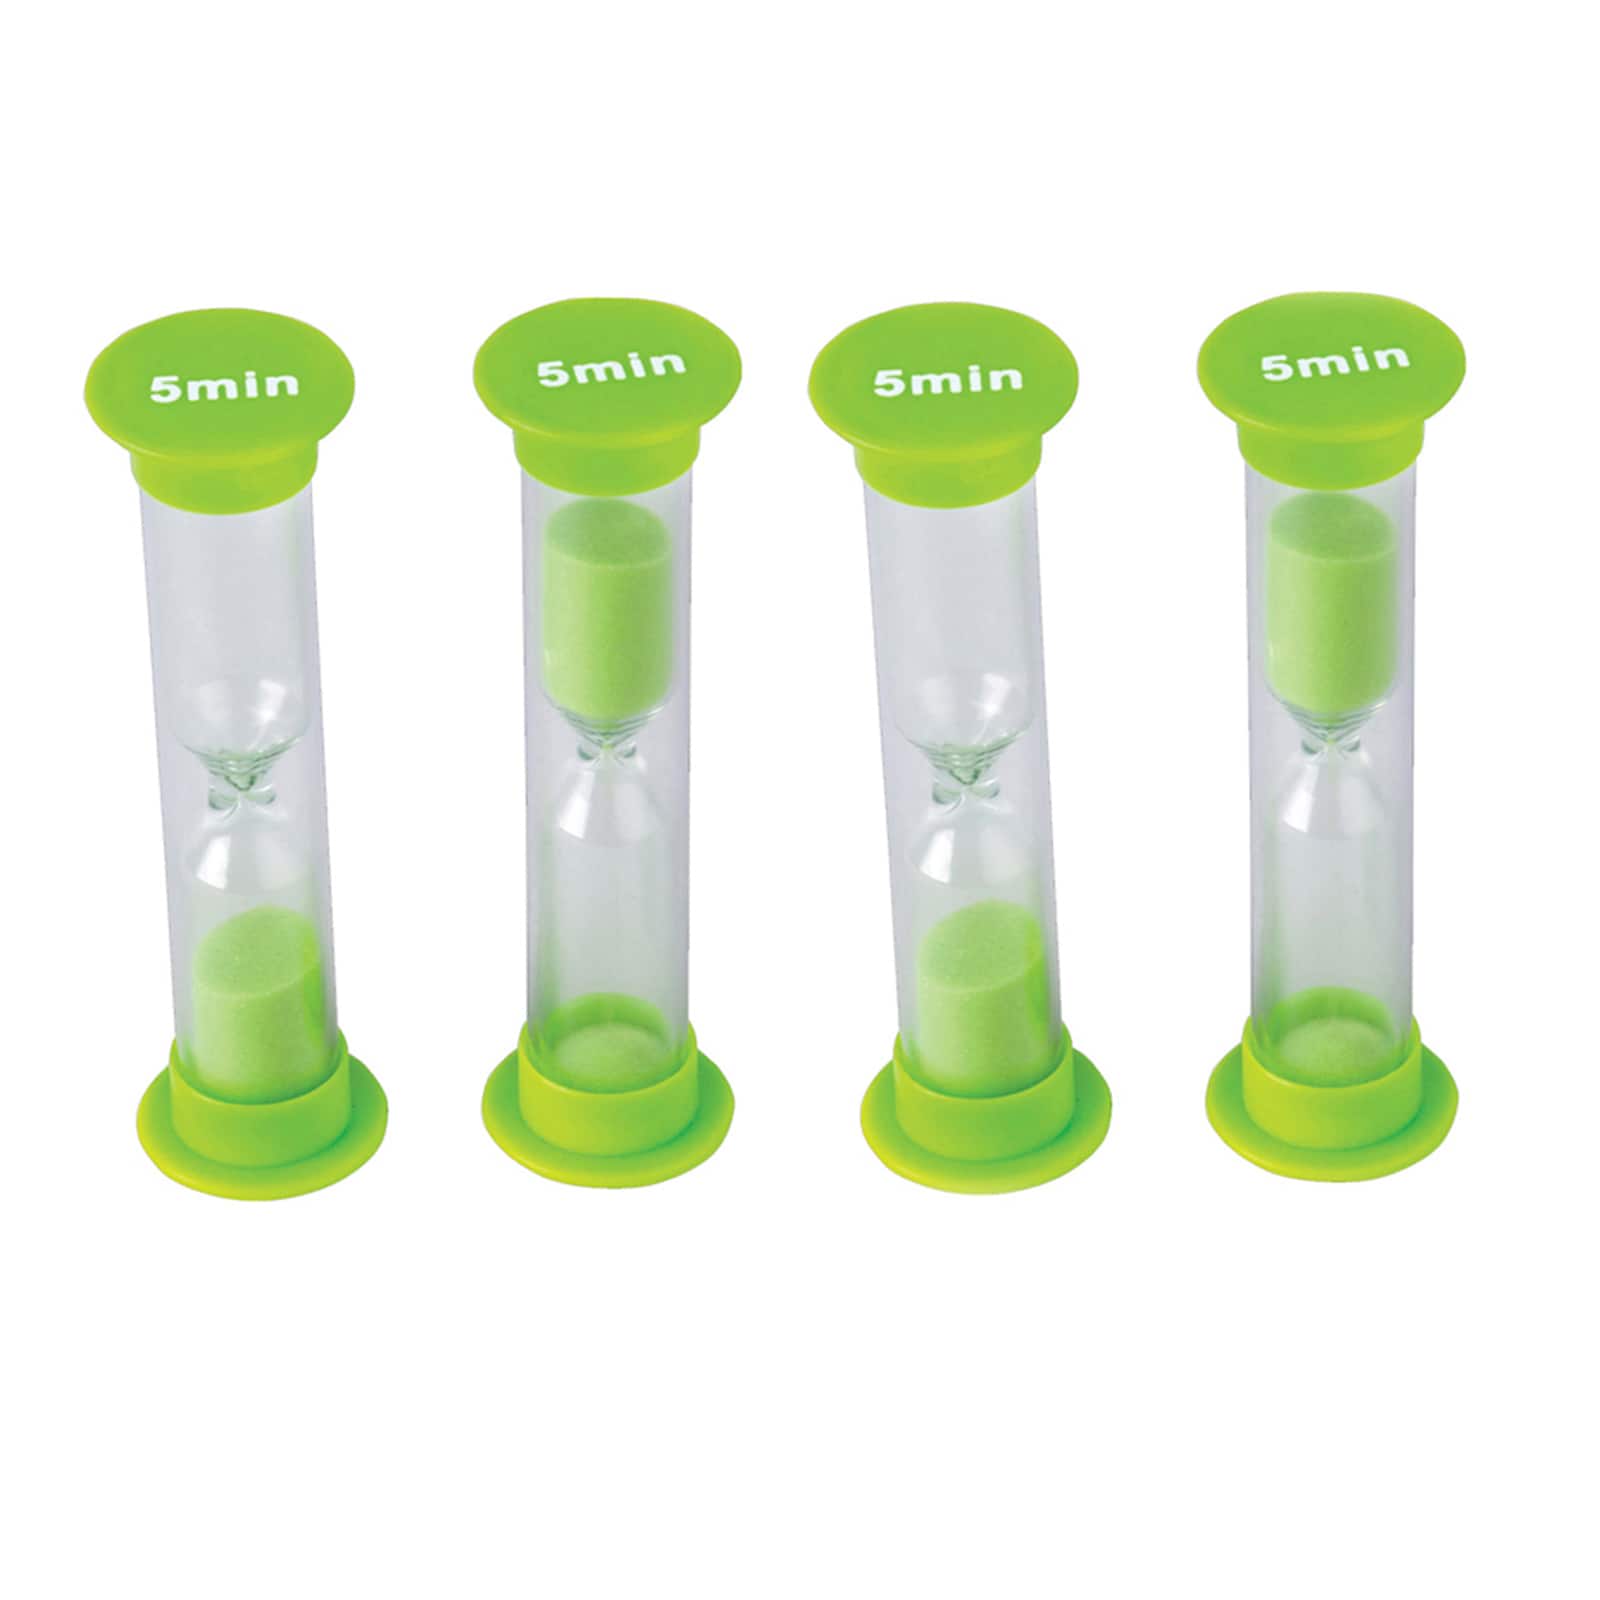 4 Small Green 5-Minute Sand Timers, 5 Packs